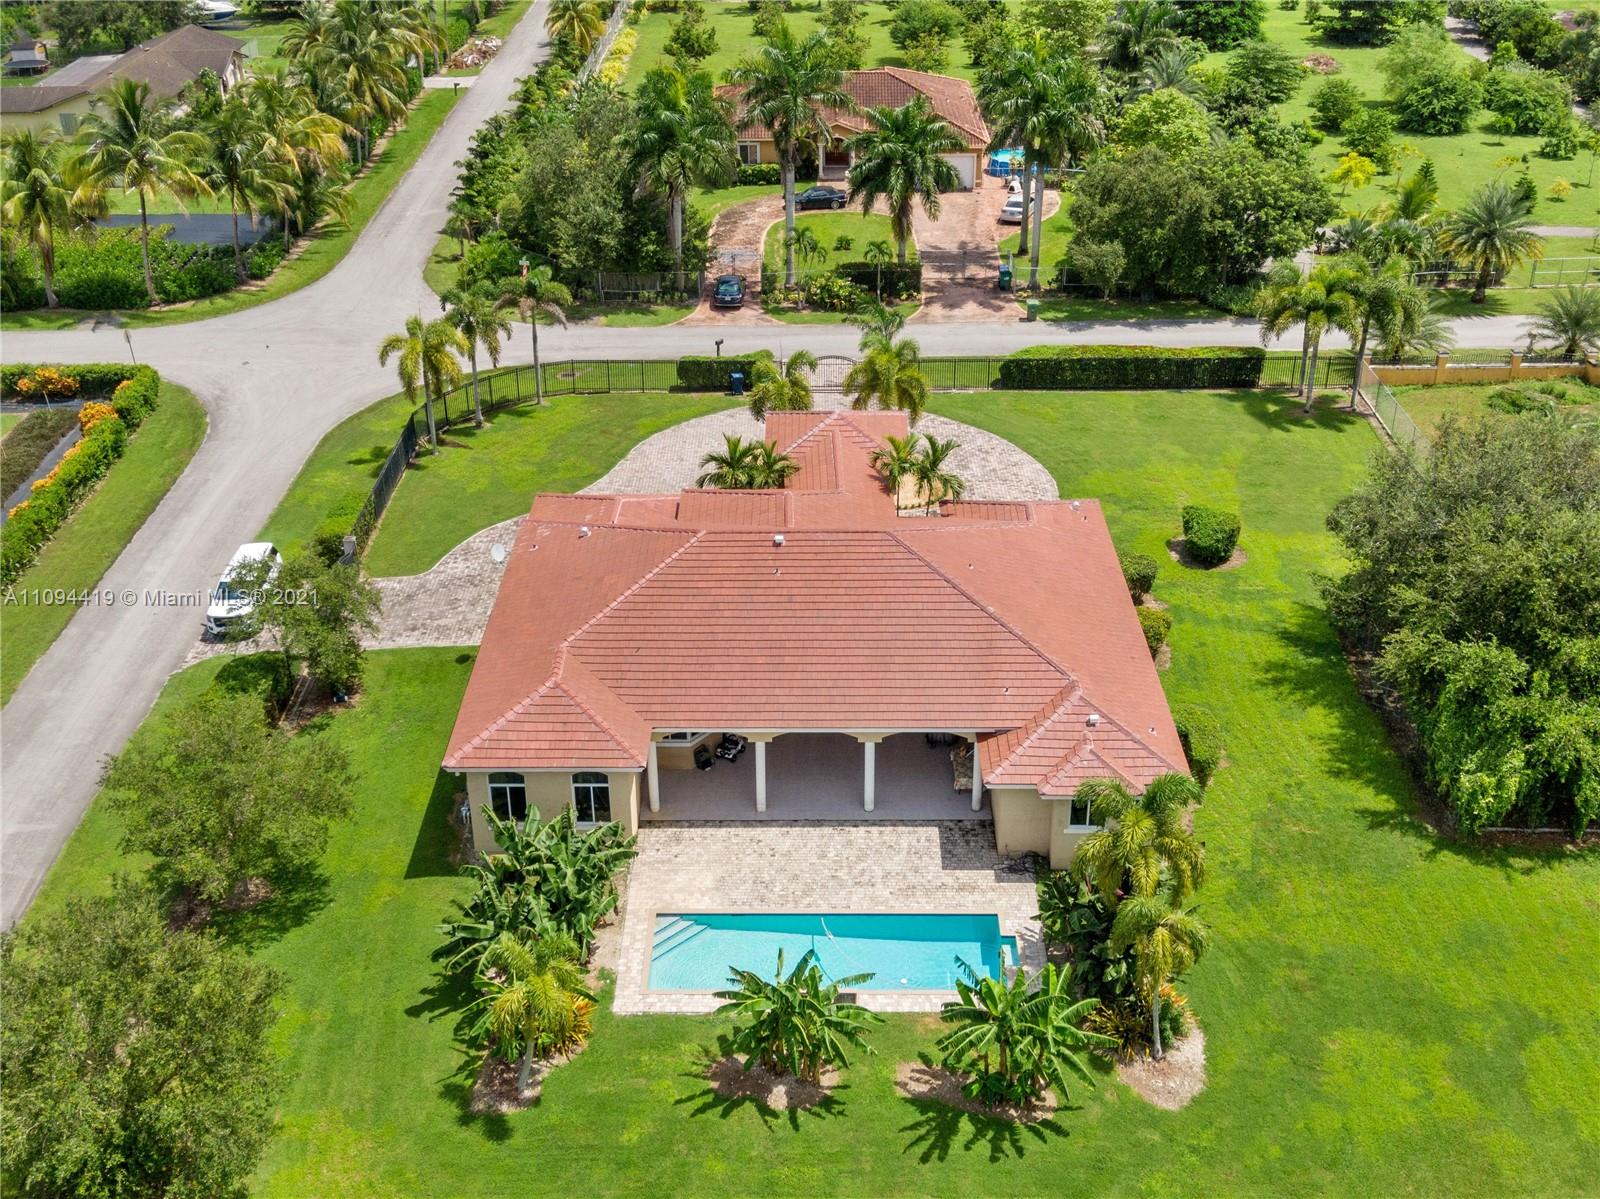 an aerial view of a house with swimming pool patio and lake view